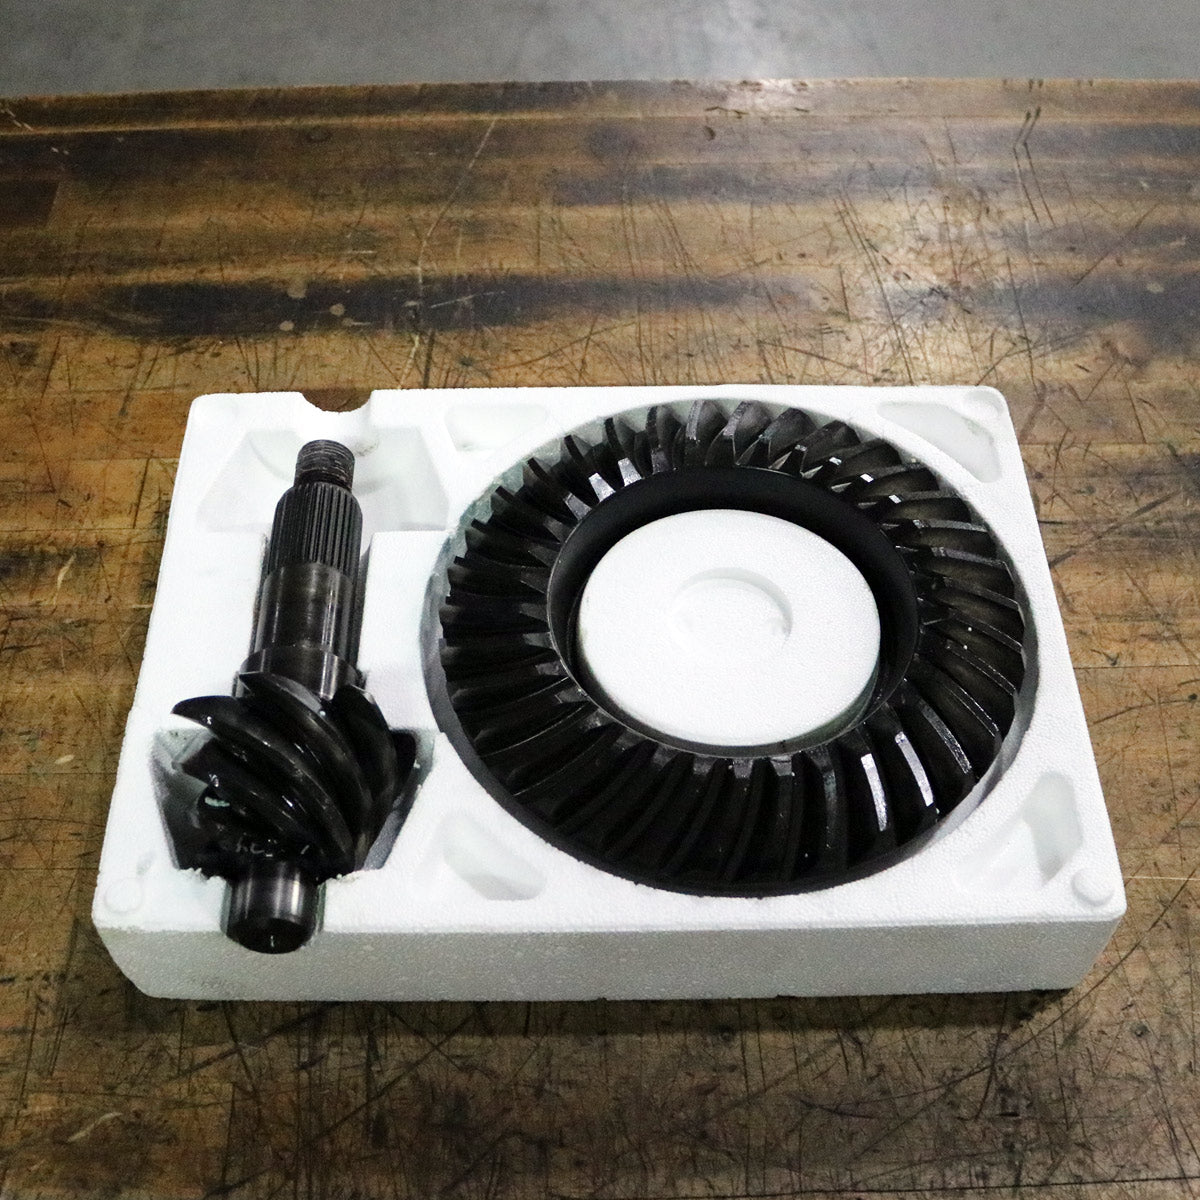 TOMS FORD 9.5 4.86 RING & PINION